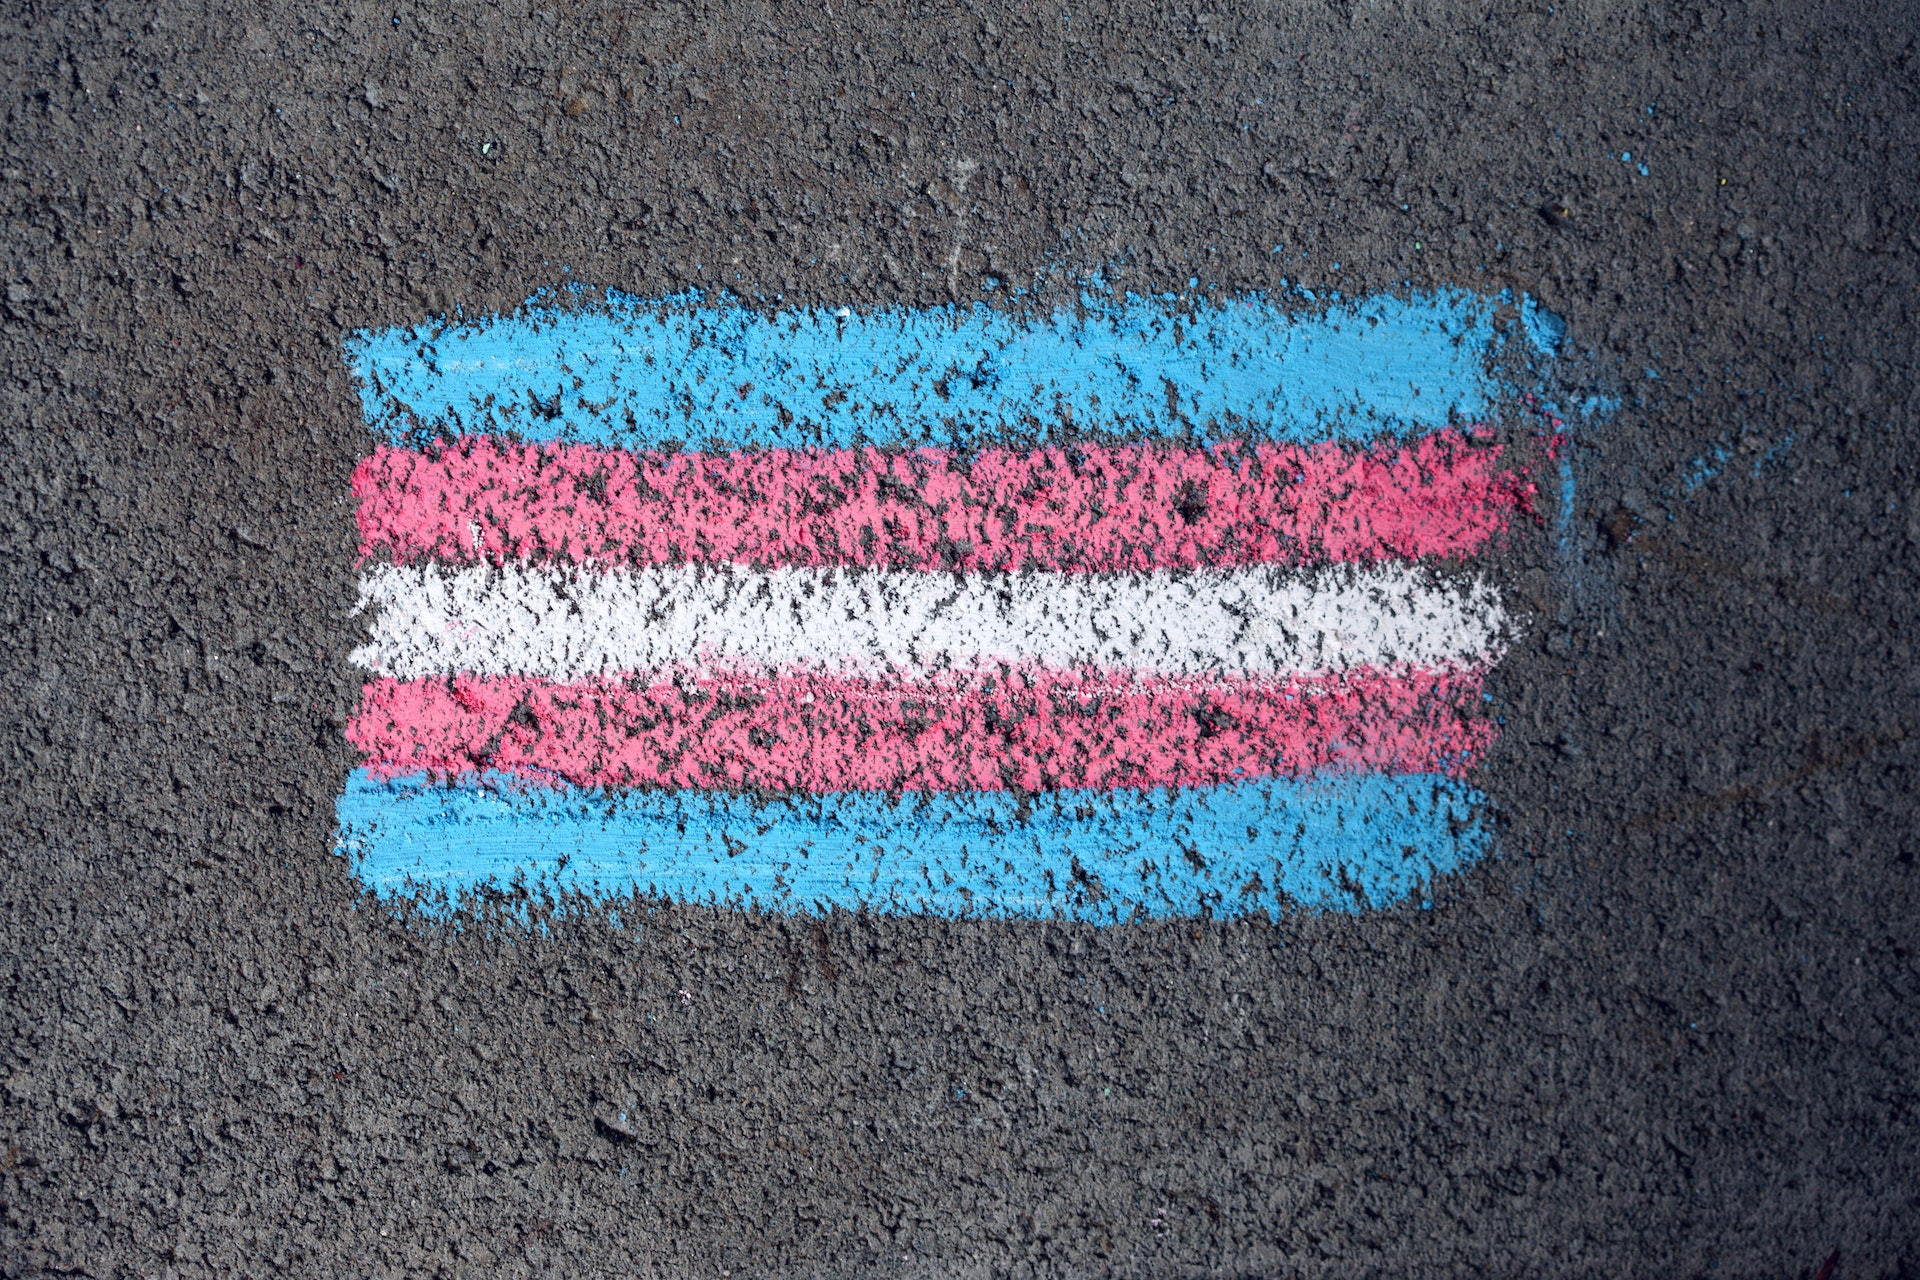 The image shows a horizontal stripe pattern painted on a rough surface, which appears to be asphalt due to its texture. The pattern consists of several colored horizontal bands: two light blue stripes on the top and bottom with a combination of pink, white, and another pink colored stripe in between, creating a five-striped block of color.\n\nThis pattern is distinctive and reminiscent of the Transgender Pride Flag, which represents the transgender community and includes these specific colors: blue (representing boys/men), pink (representing girls/women), and white (for those who are non-binary, transitioning or consider themselves having a neutral or undefined gender).